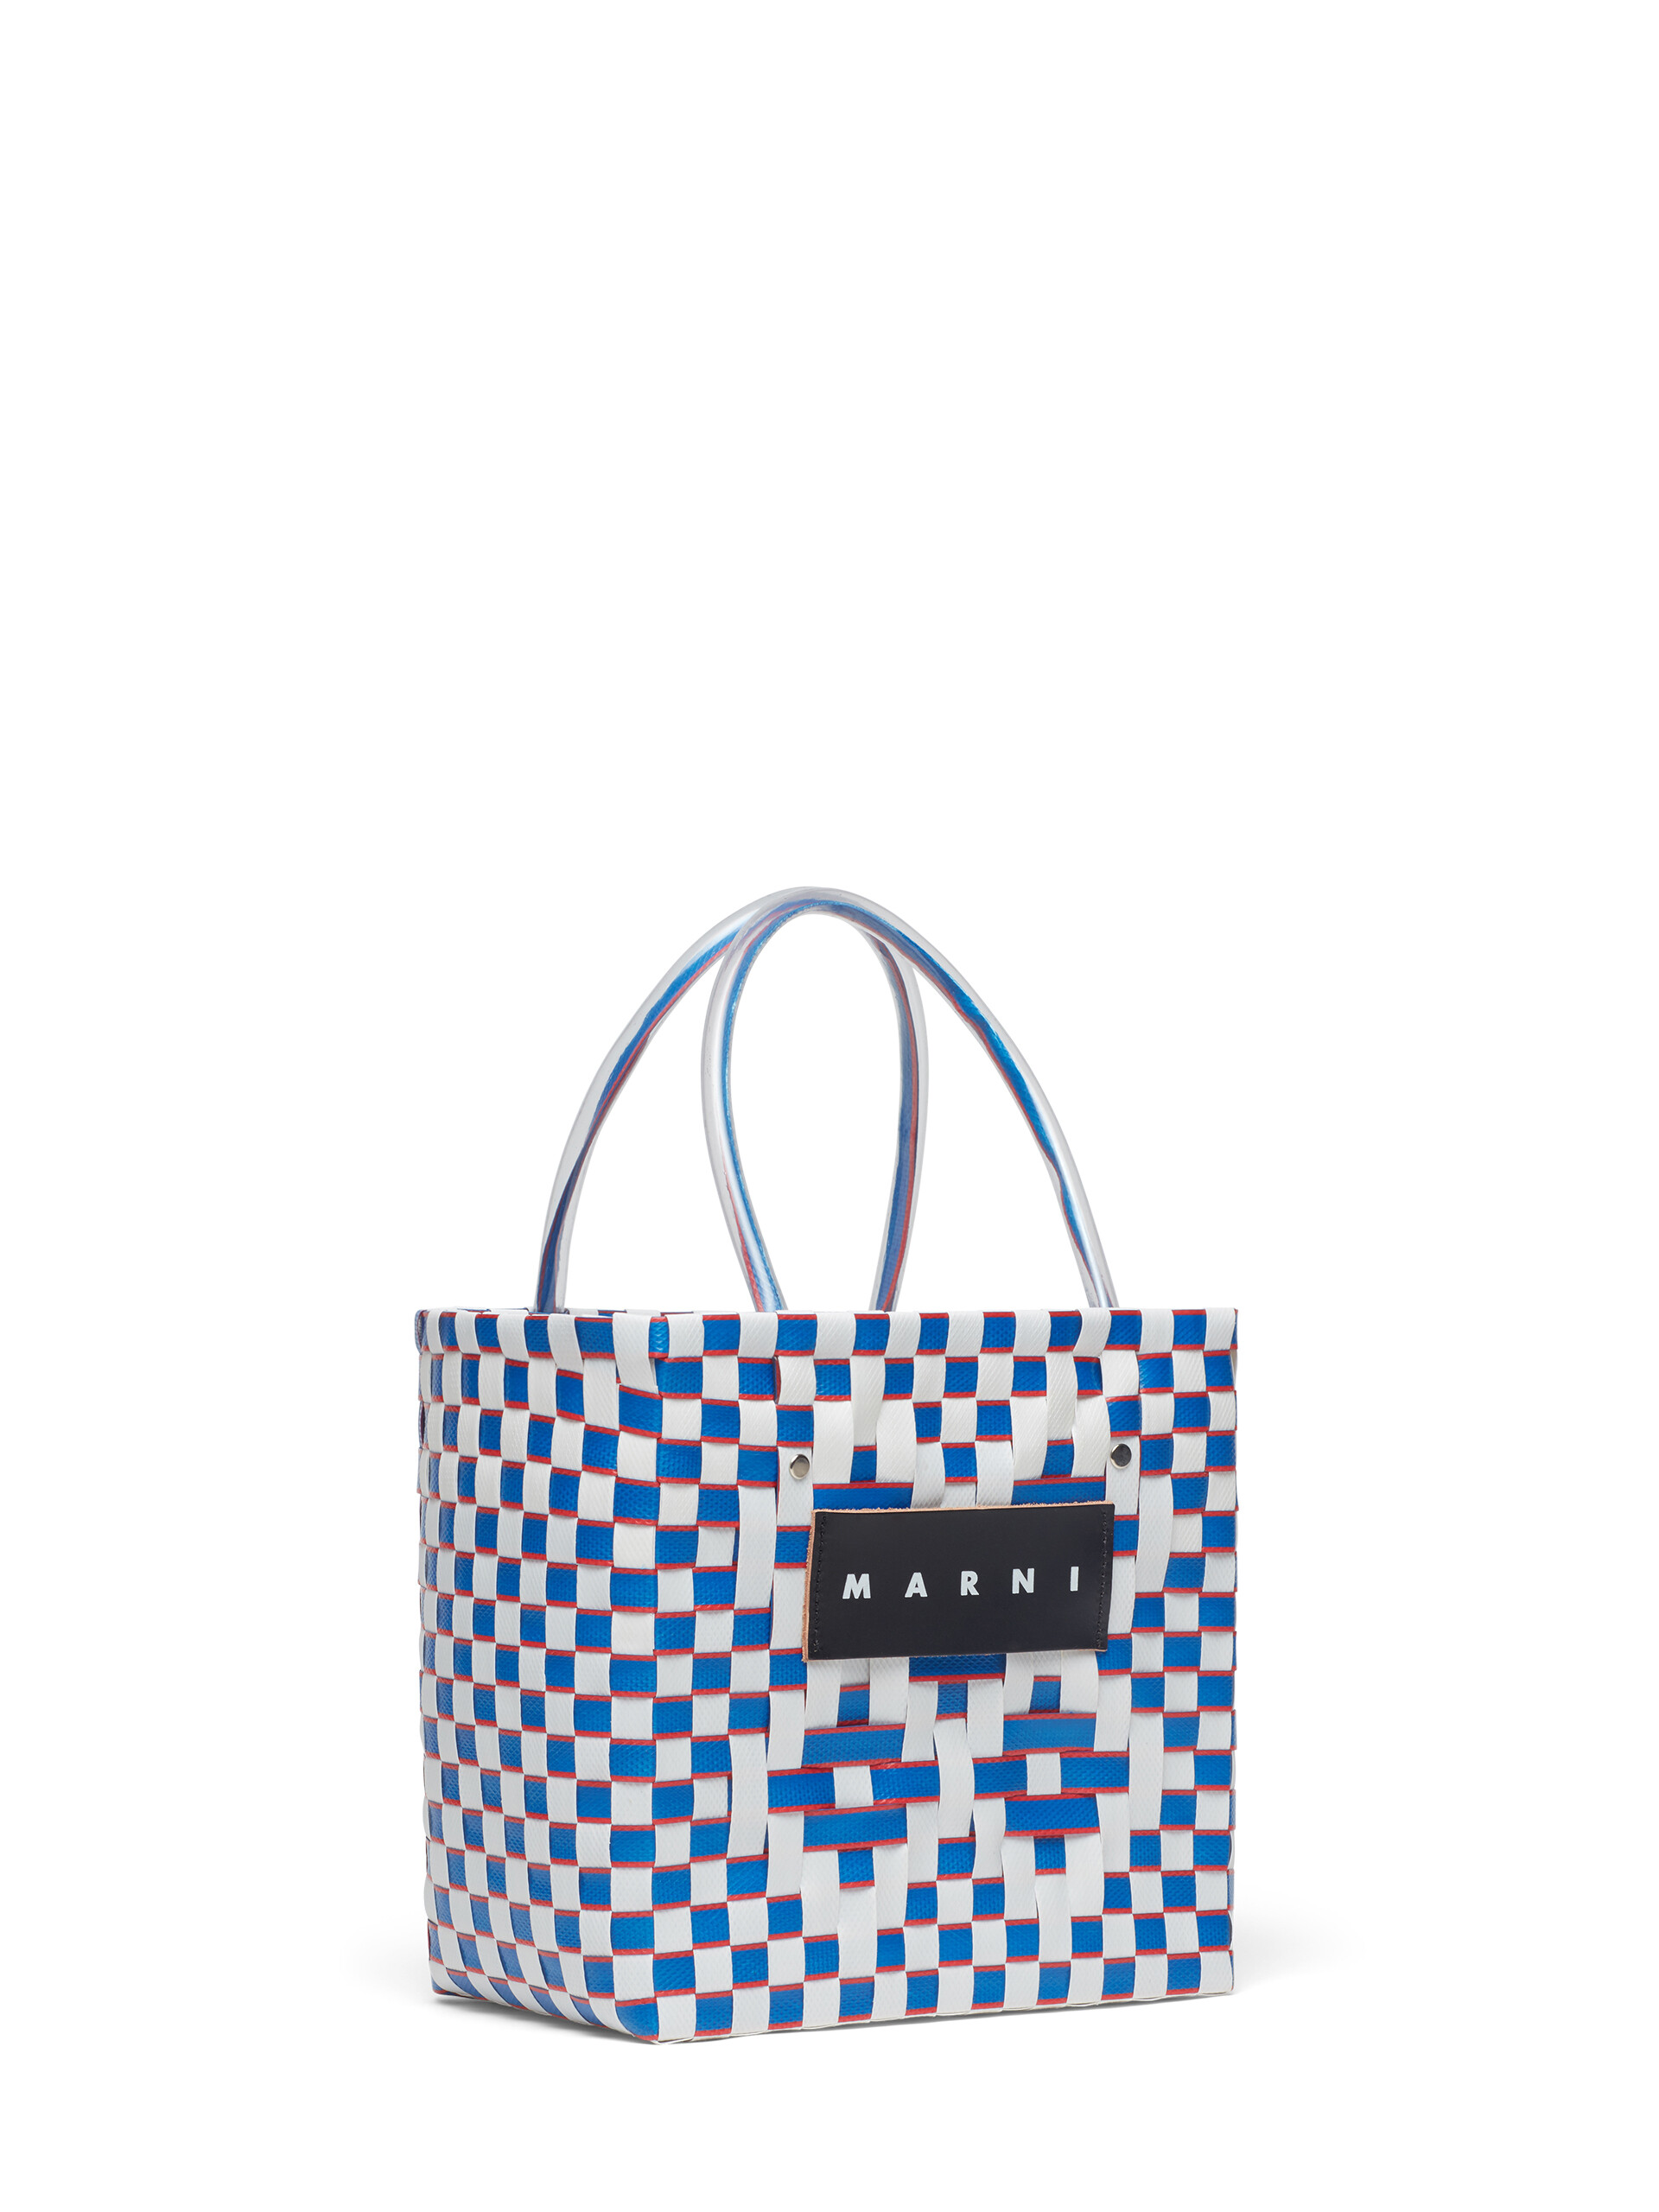 MARNI MARKET BASKET bag in white and pale blue woven material - Bags - Image 2